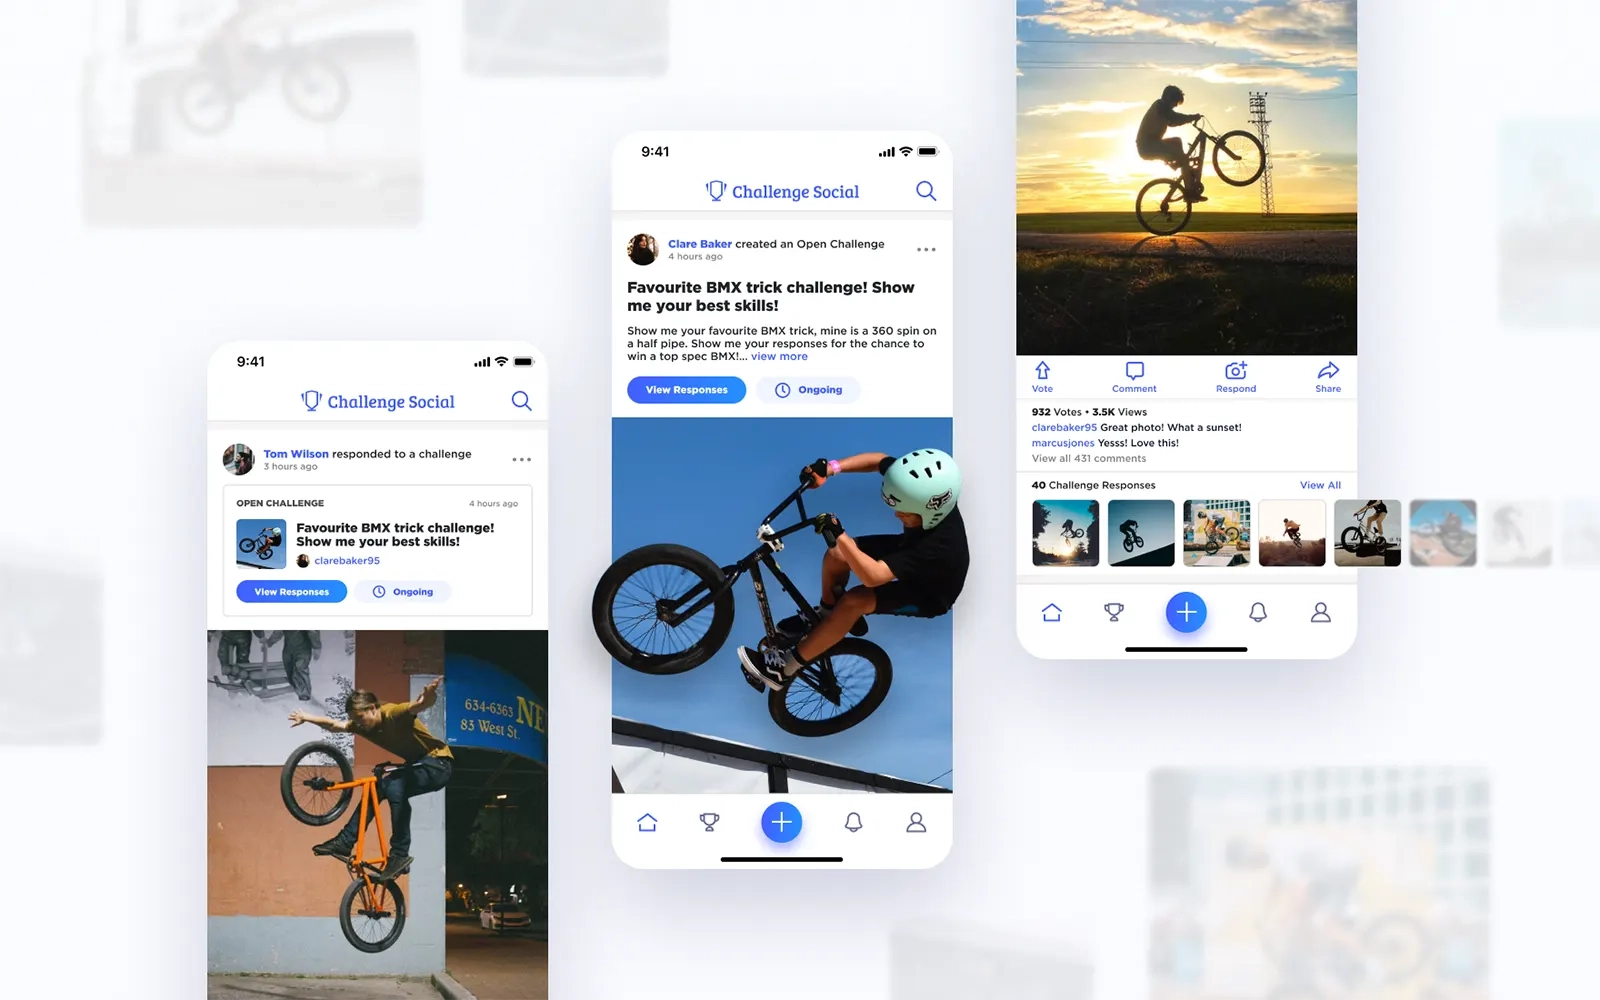 Three designs of the Challenge Social newsfeed with photos of people riding a BMX